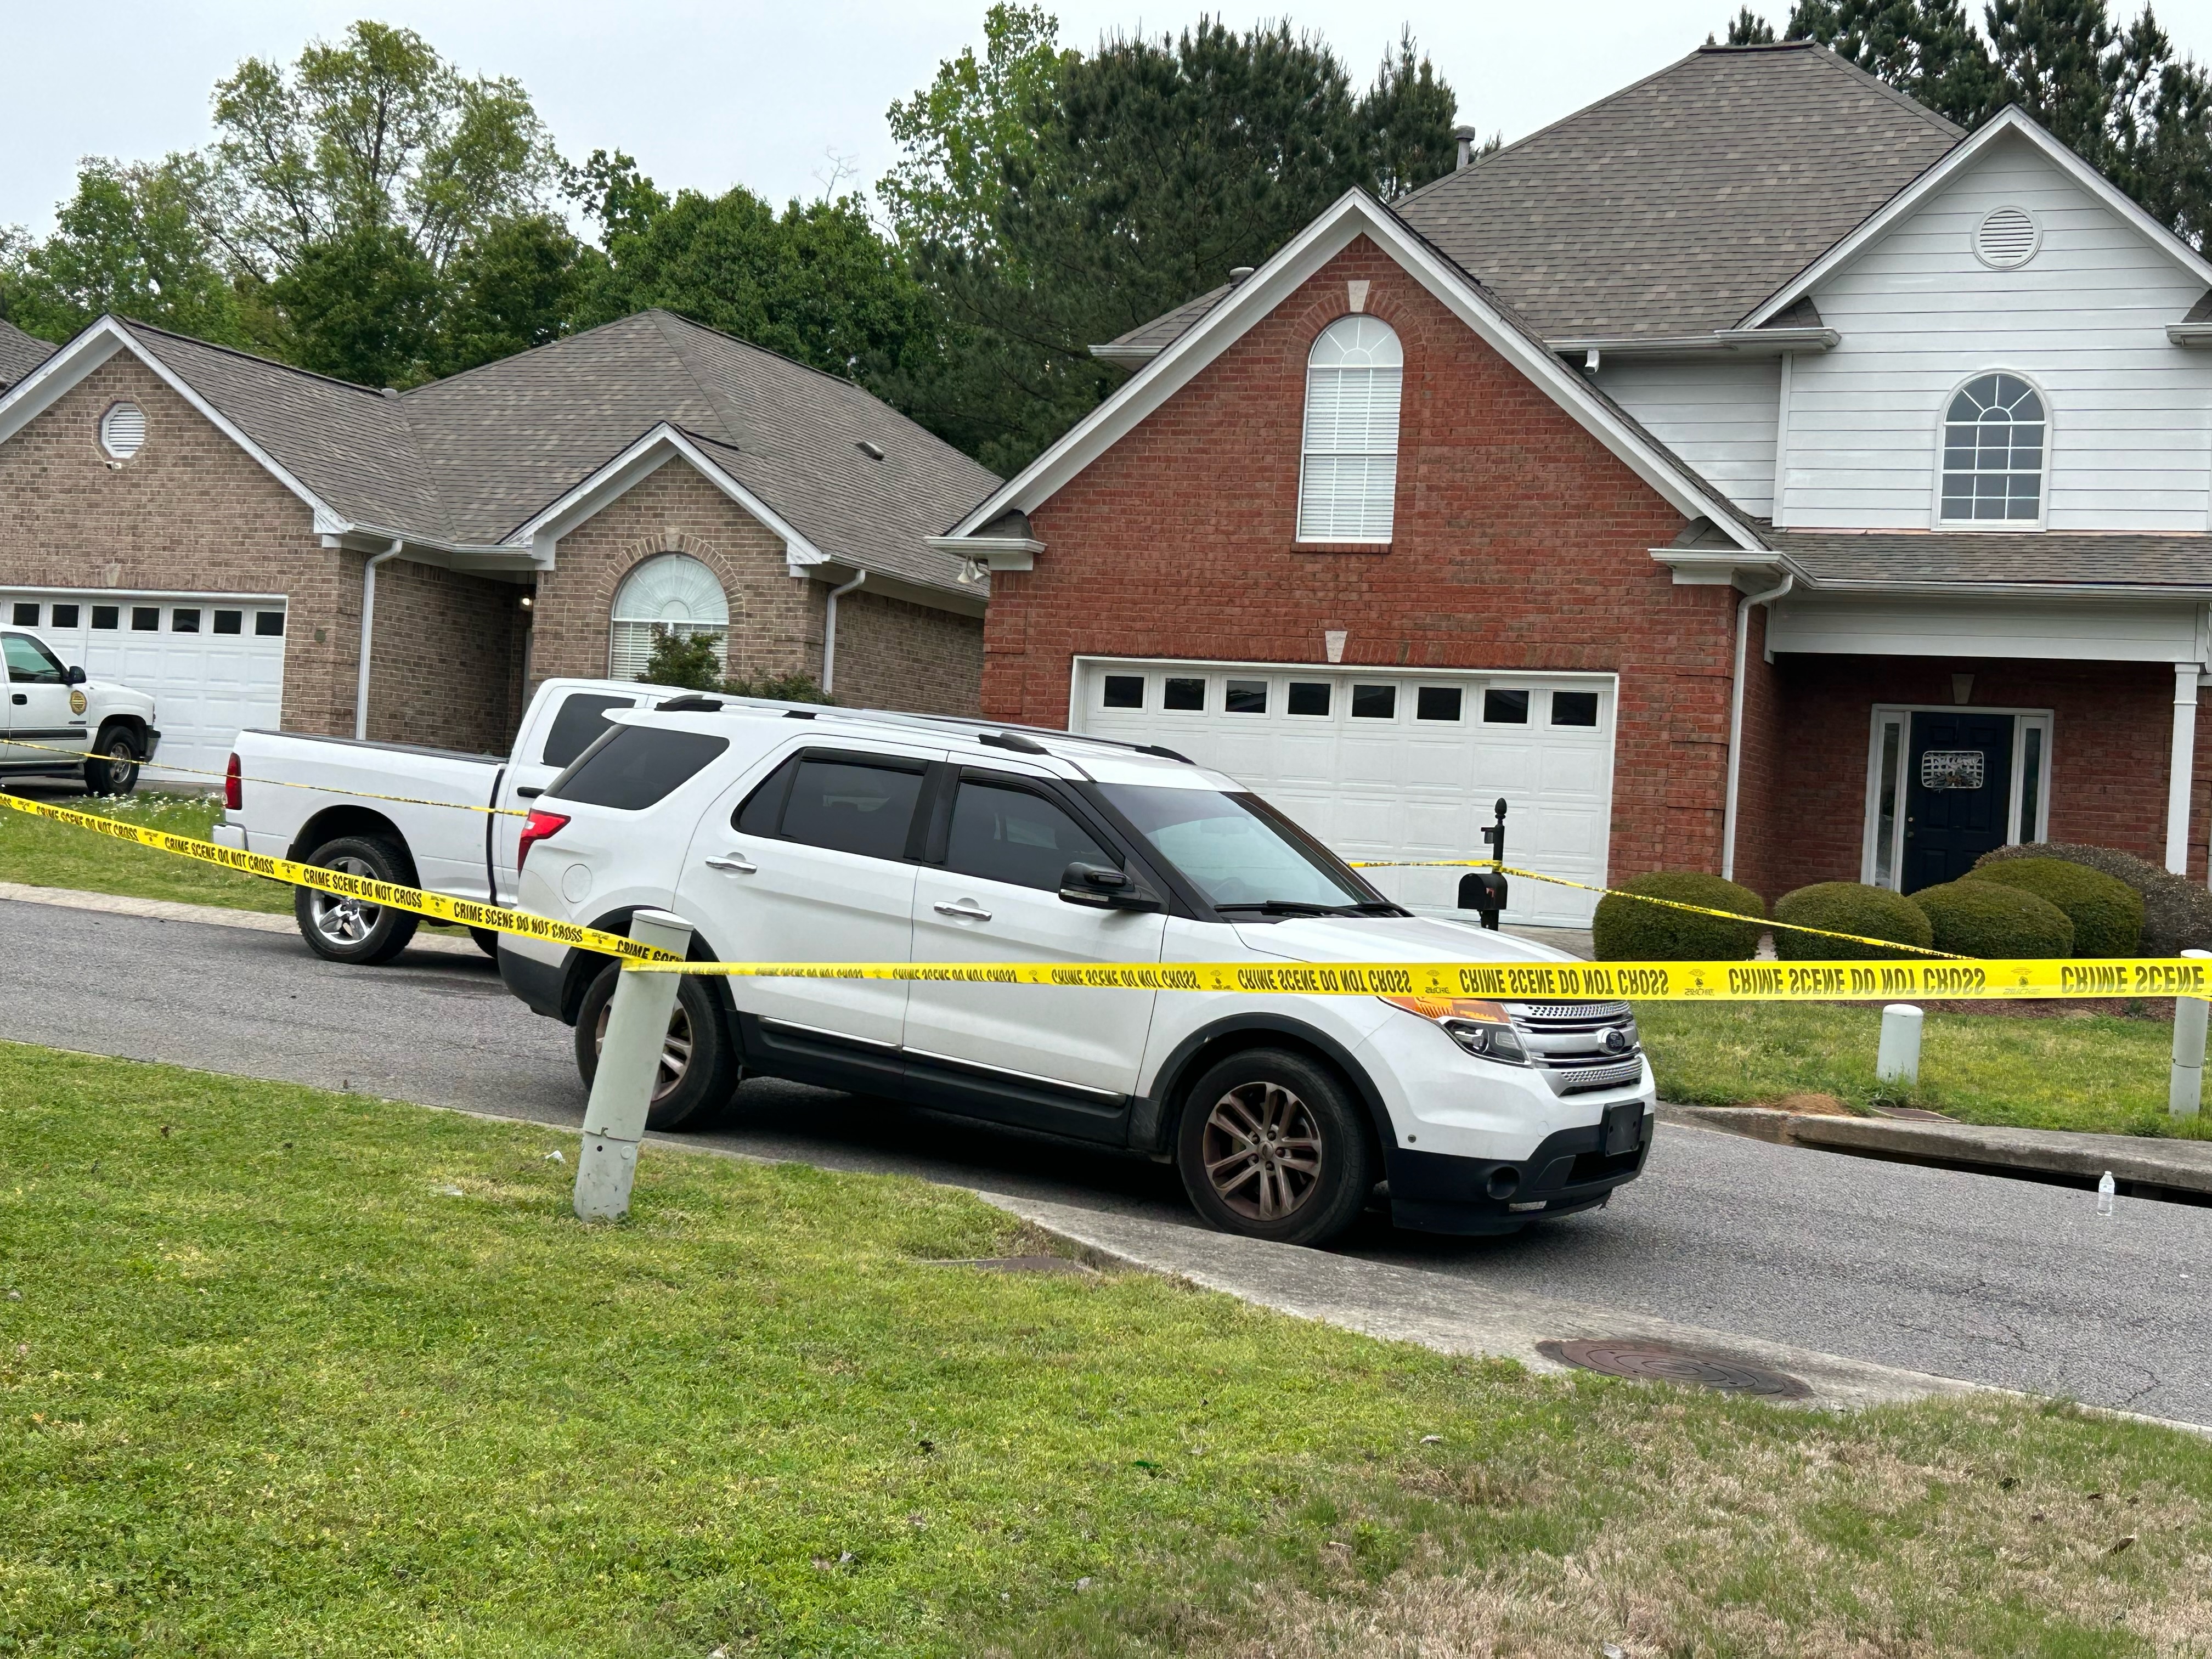 Police Woman dead, her husband in custody after domestic incident and hostage situation involving kids in Fultondale Xxx Pic Hd